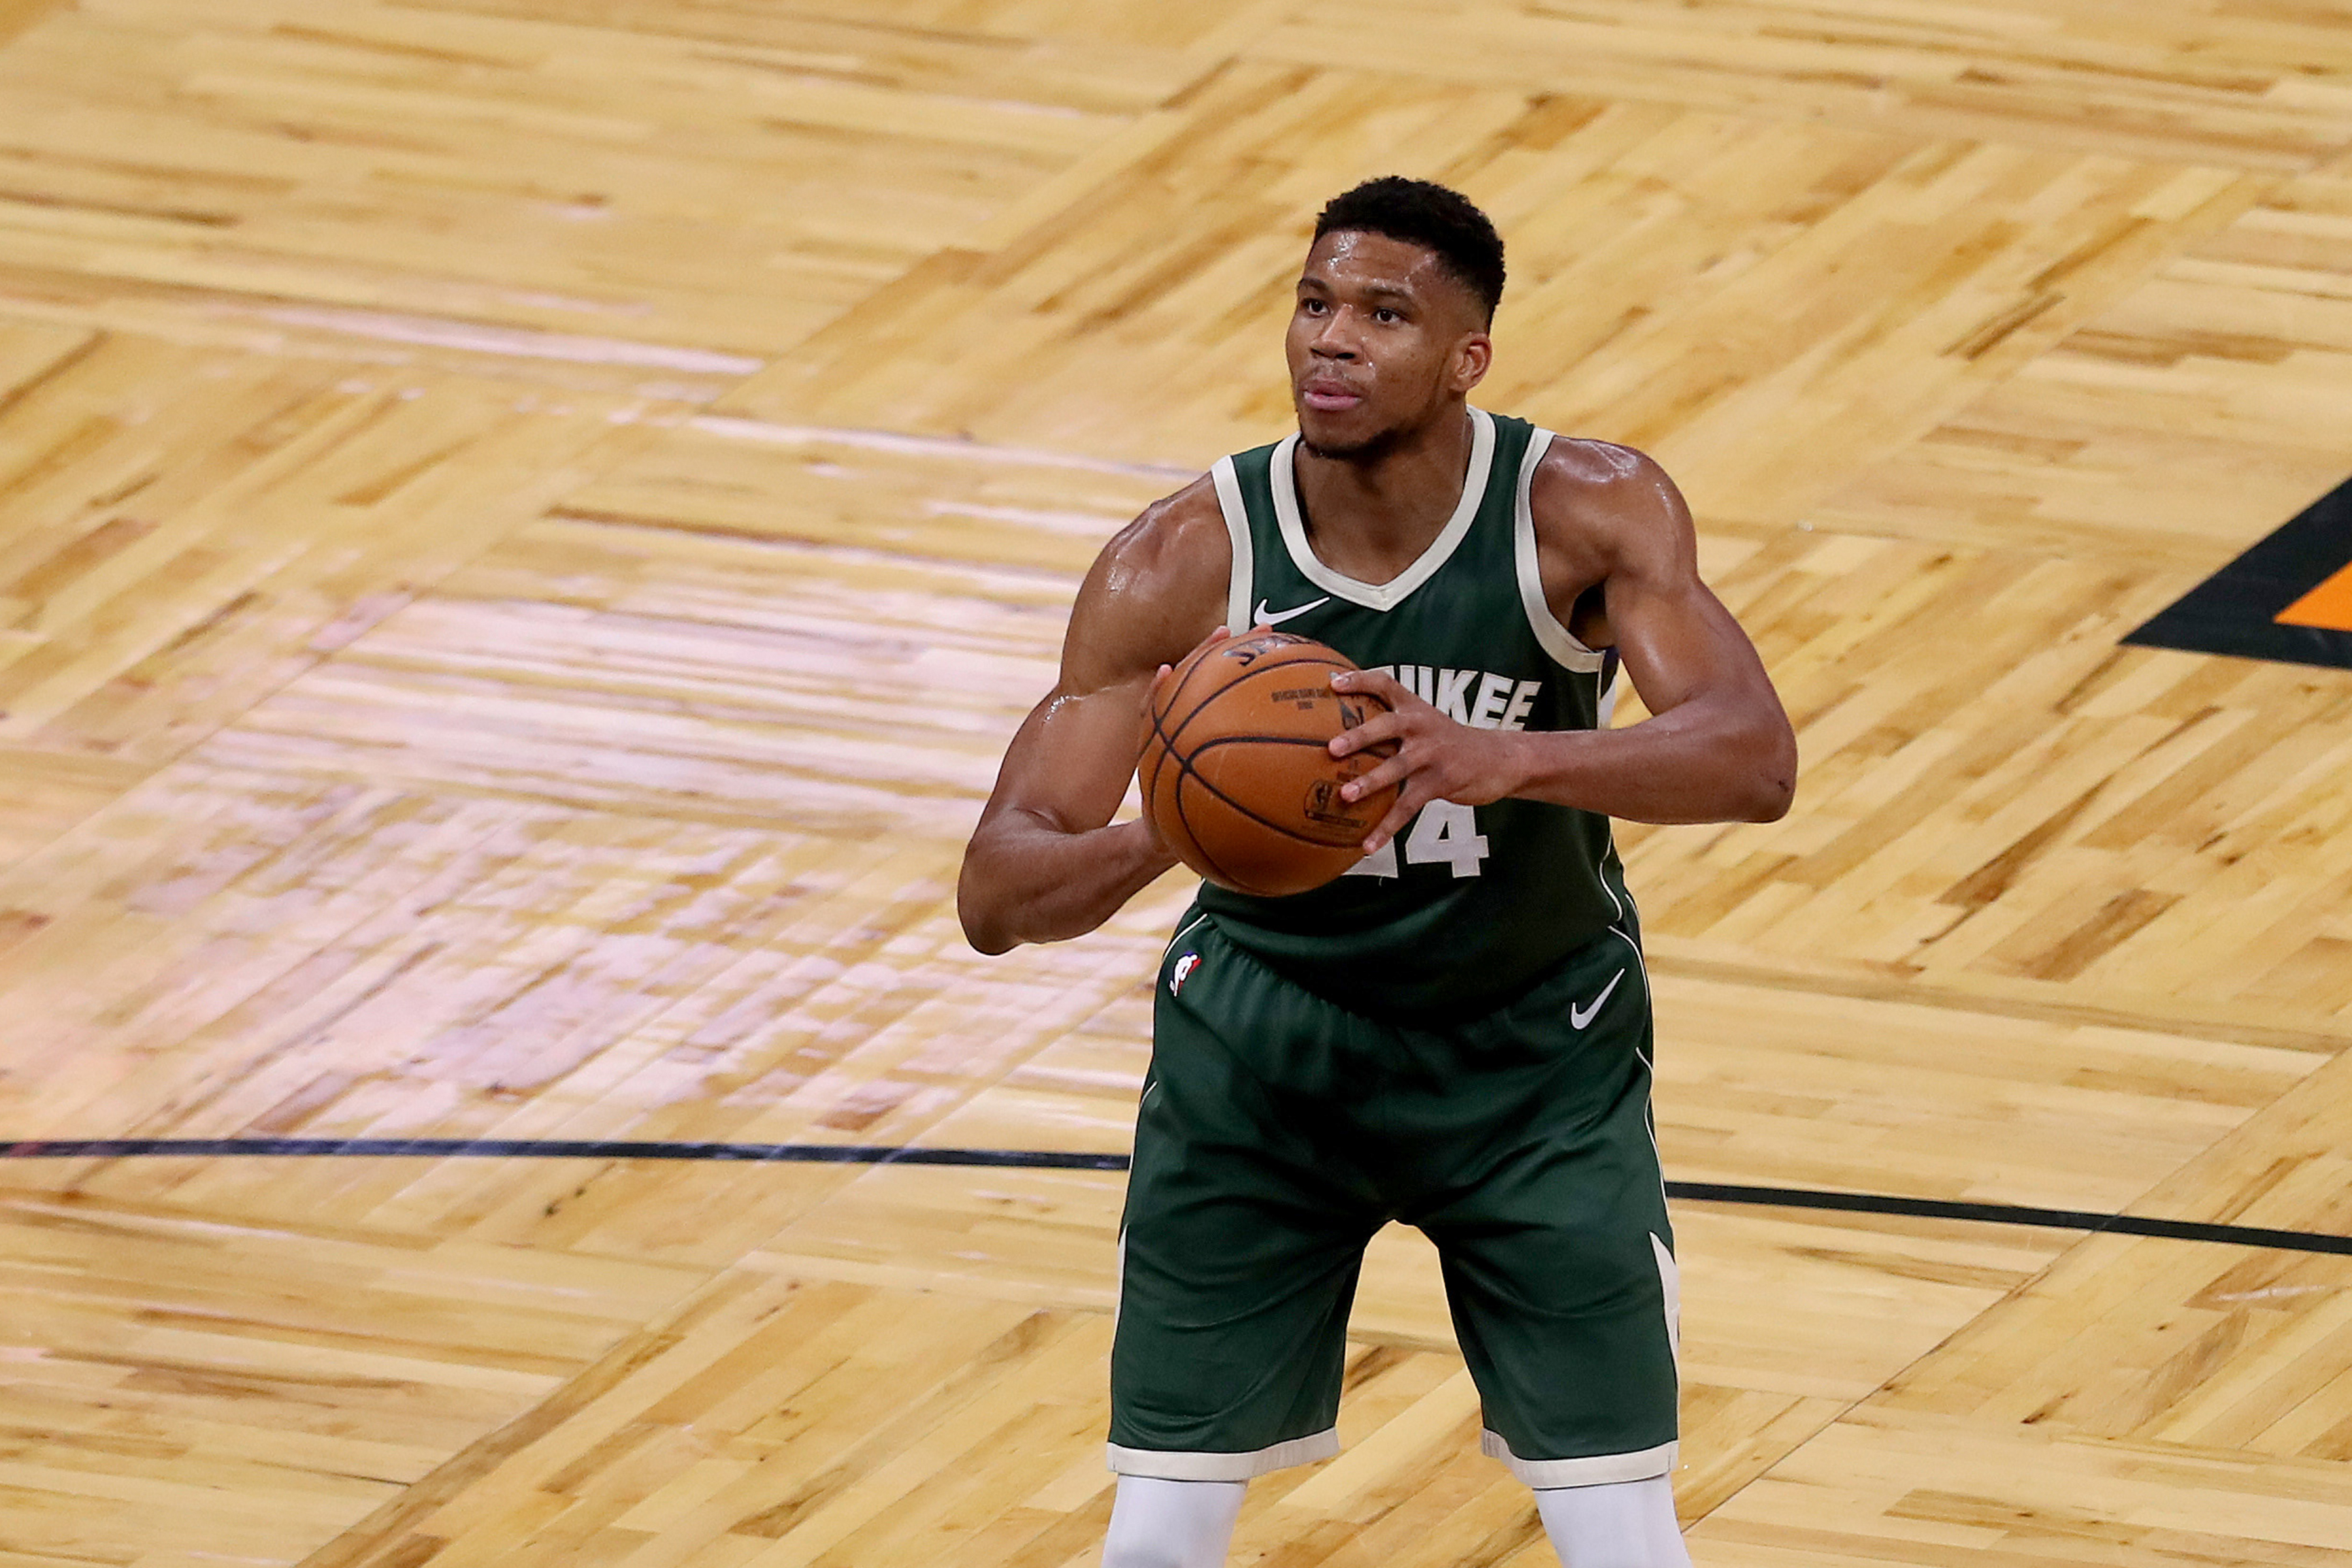 Giannis Antetokounmpo Bizarrely Made His Girlfriend Run While Carrying Their Son If He Missed Free Throws In Practice Brobible